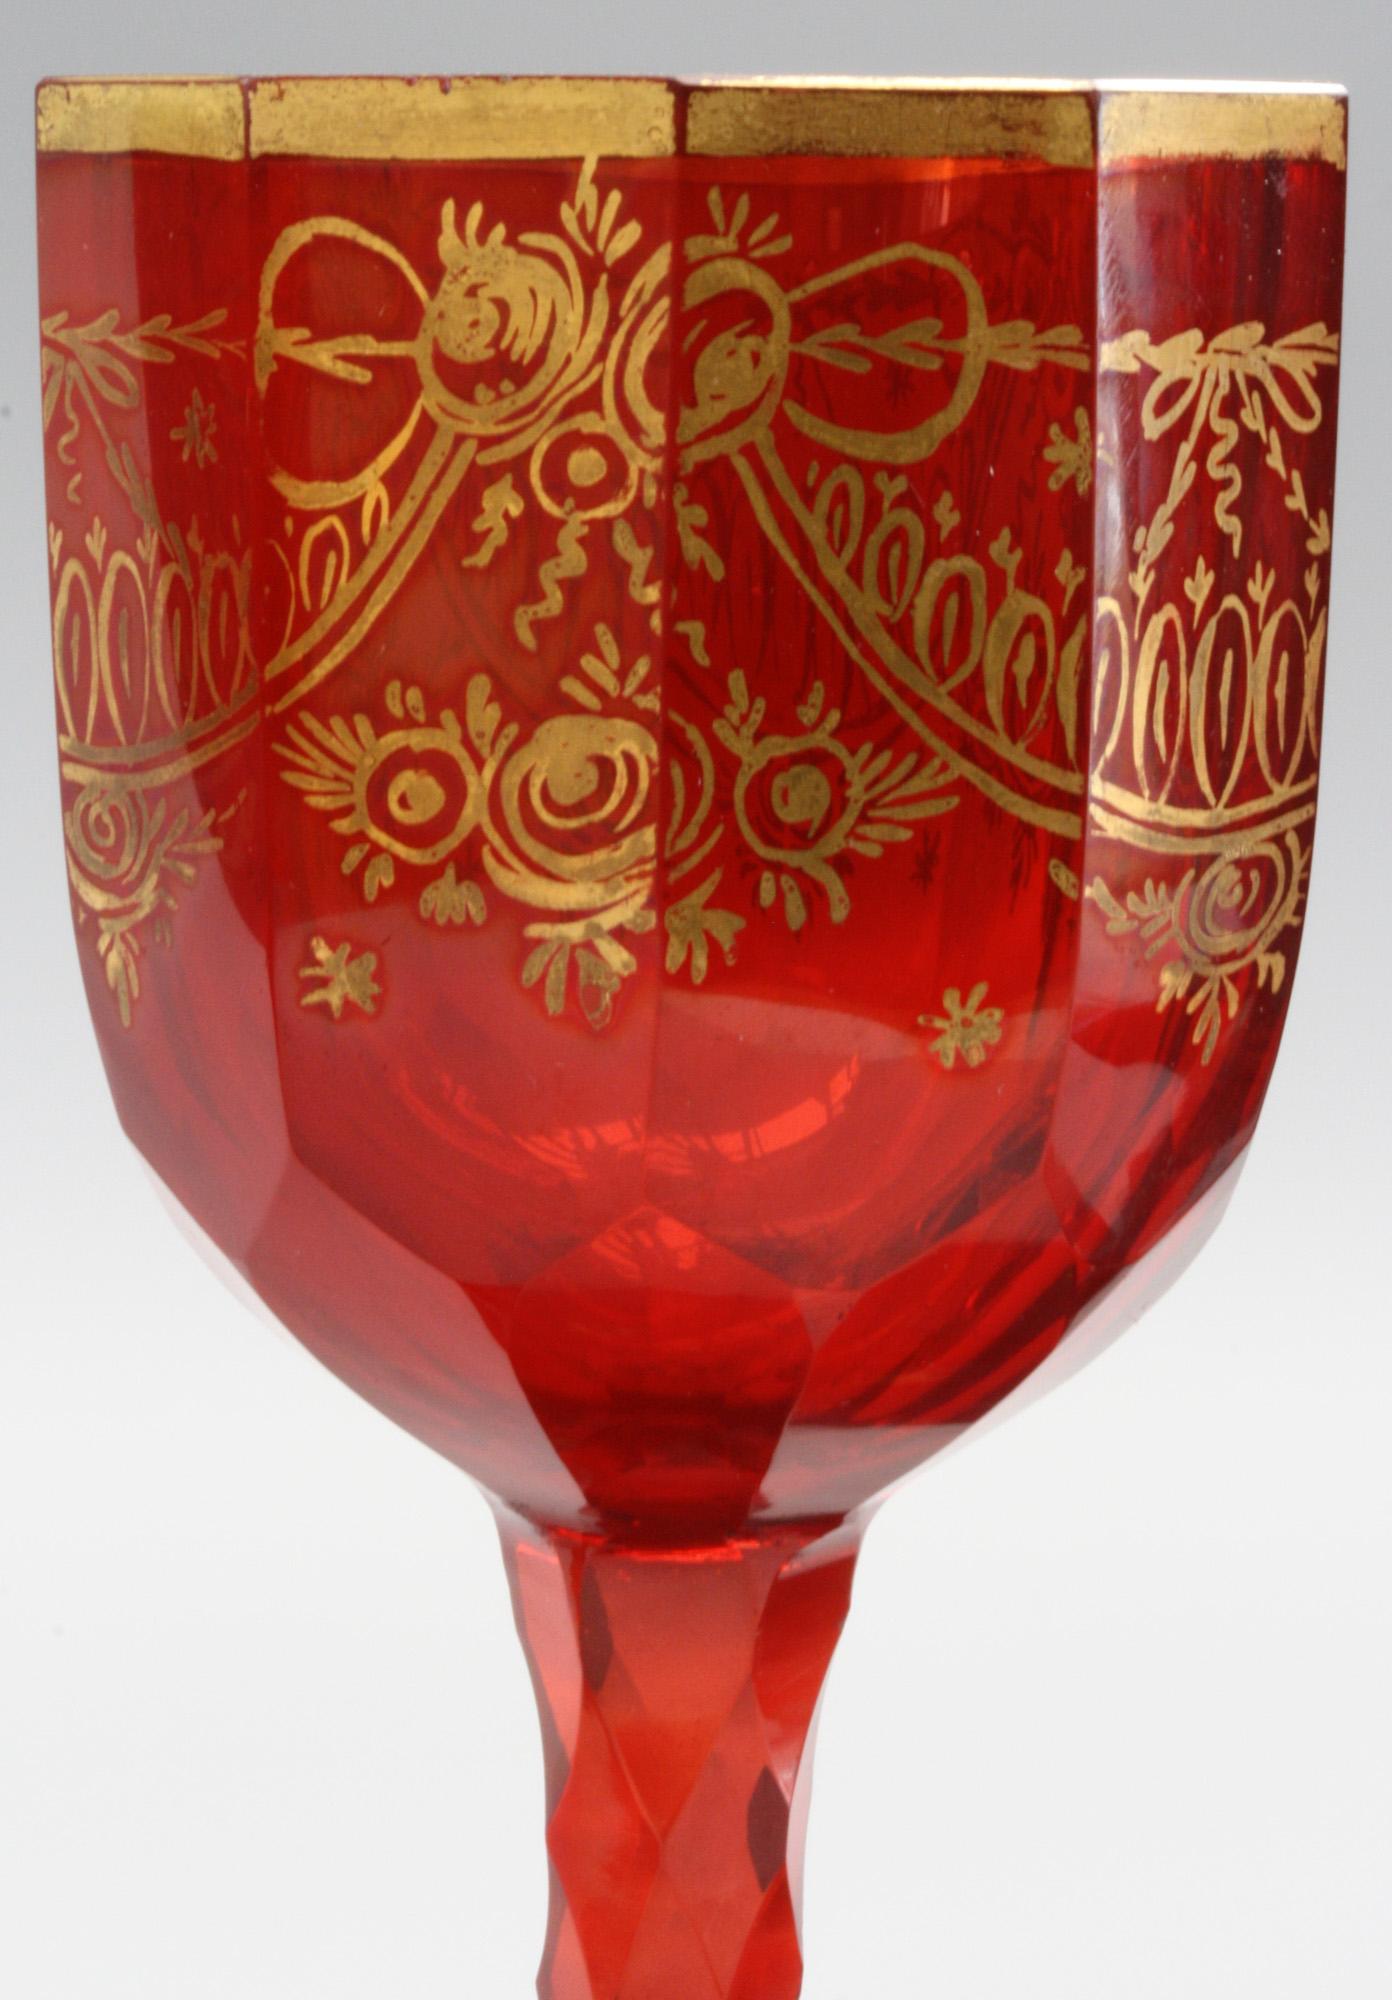 A very rare set Bohemian ruby red colored wine glasses with gilded patterning to the body and foot and dating from the early 19th century around 1810/20. These stylish glasses have wide rounded slightly domed feet decorated with small gilded star